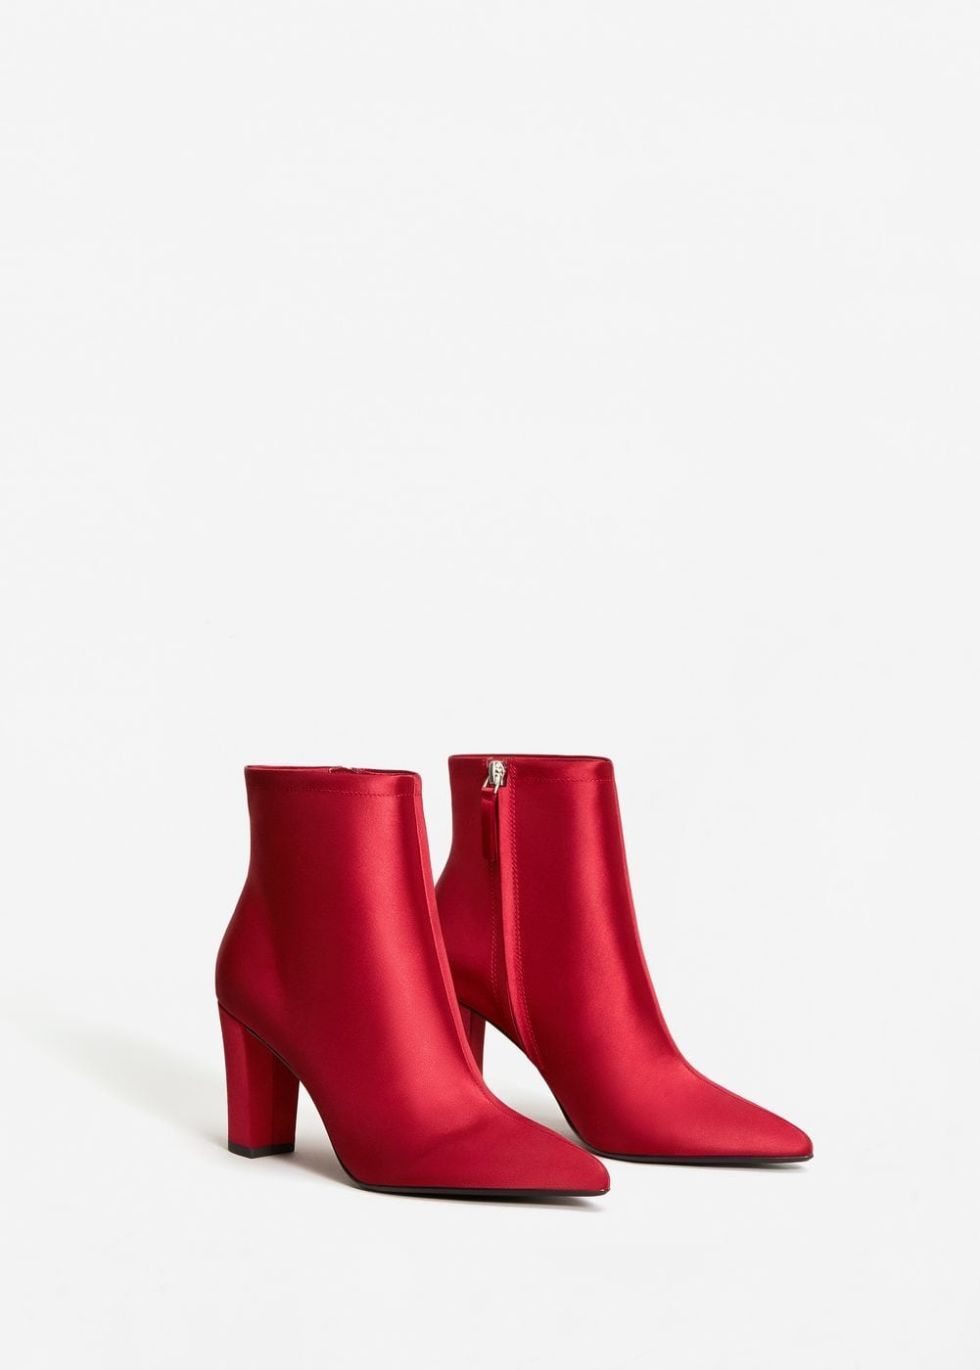 Footwear, Red, Boot, Shoe, Pink, Joint, Leg, Magenta, High heels, Leather, 